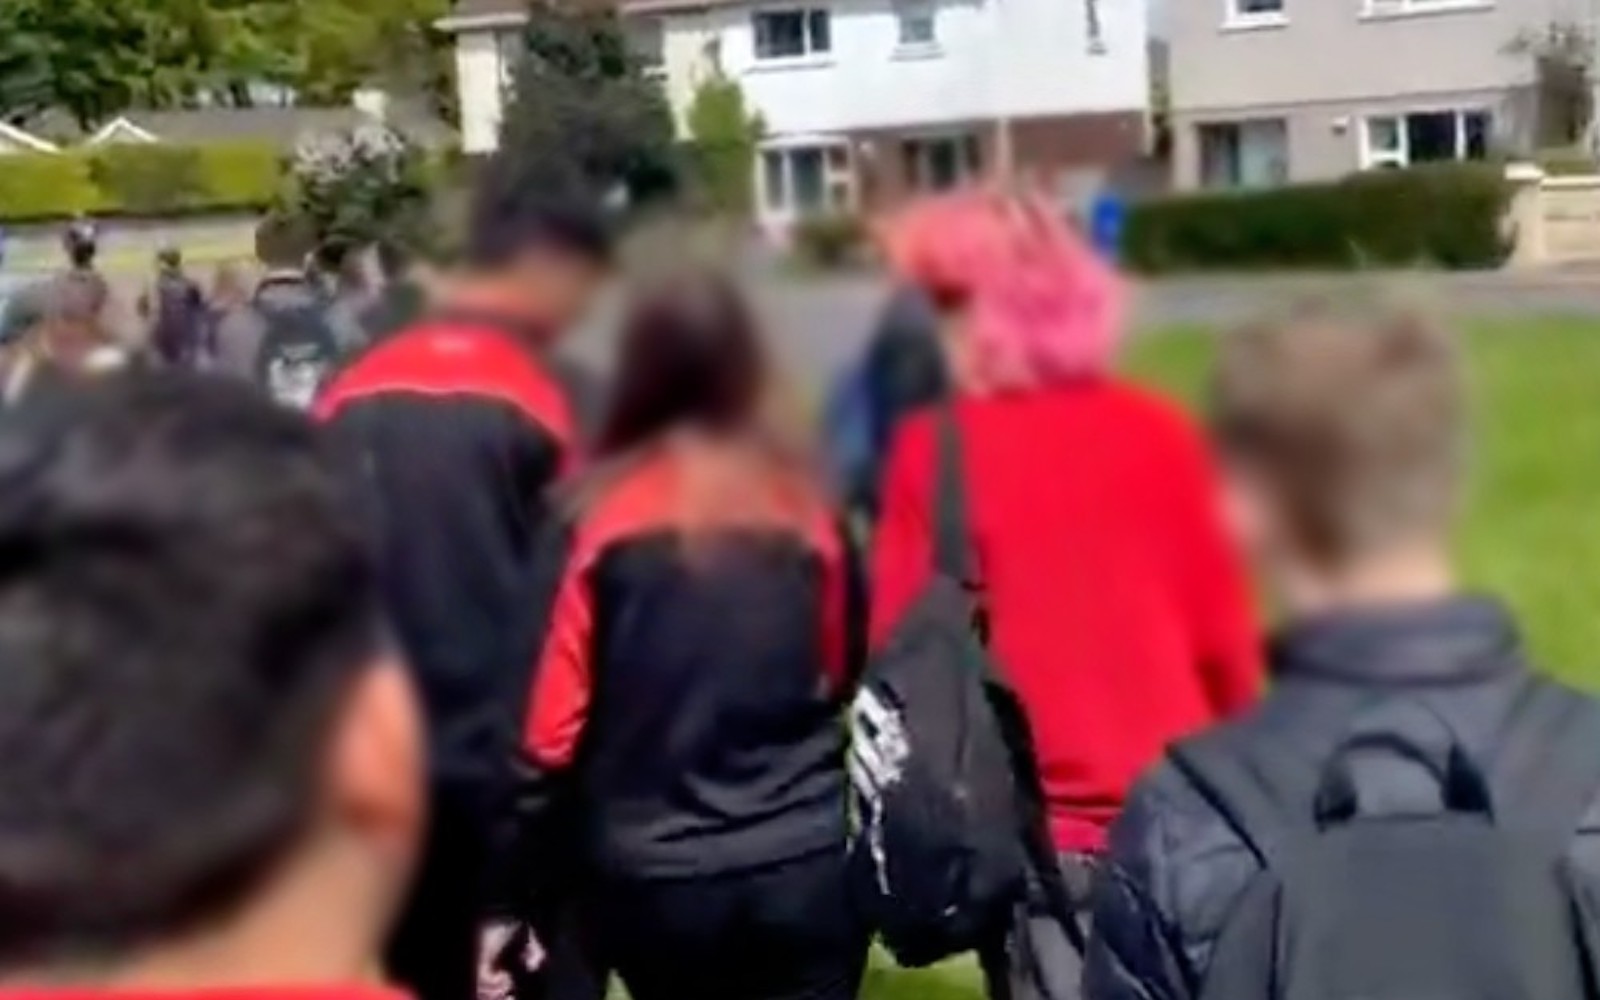 Schoolboyboysex - Teens arrested after schoolboy, 14, brutally attacked 'for being gay'